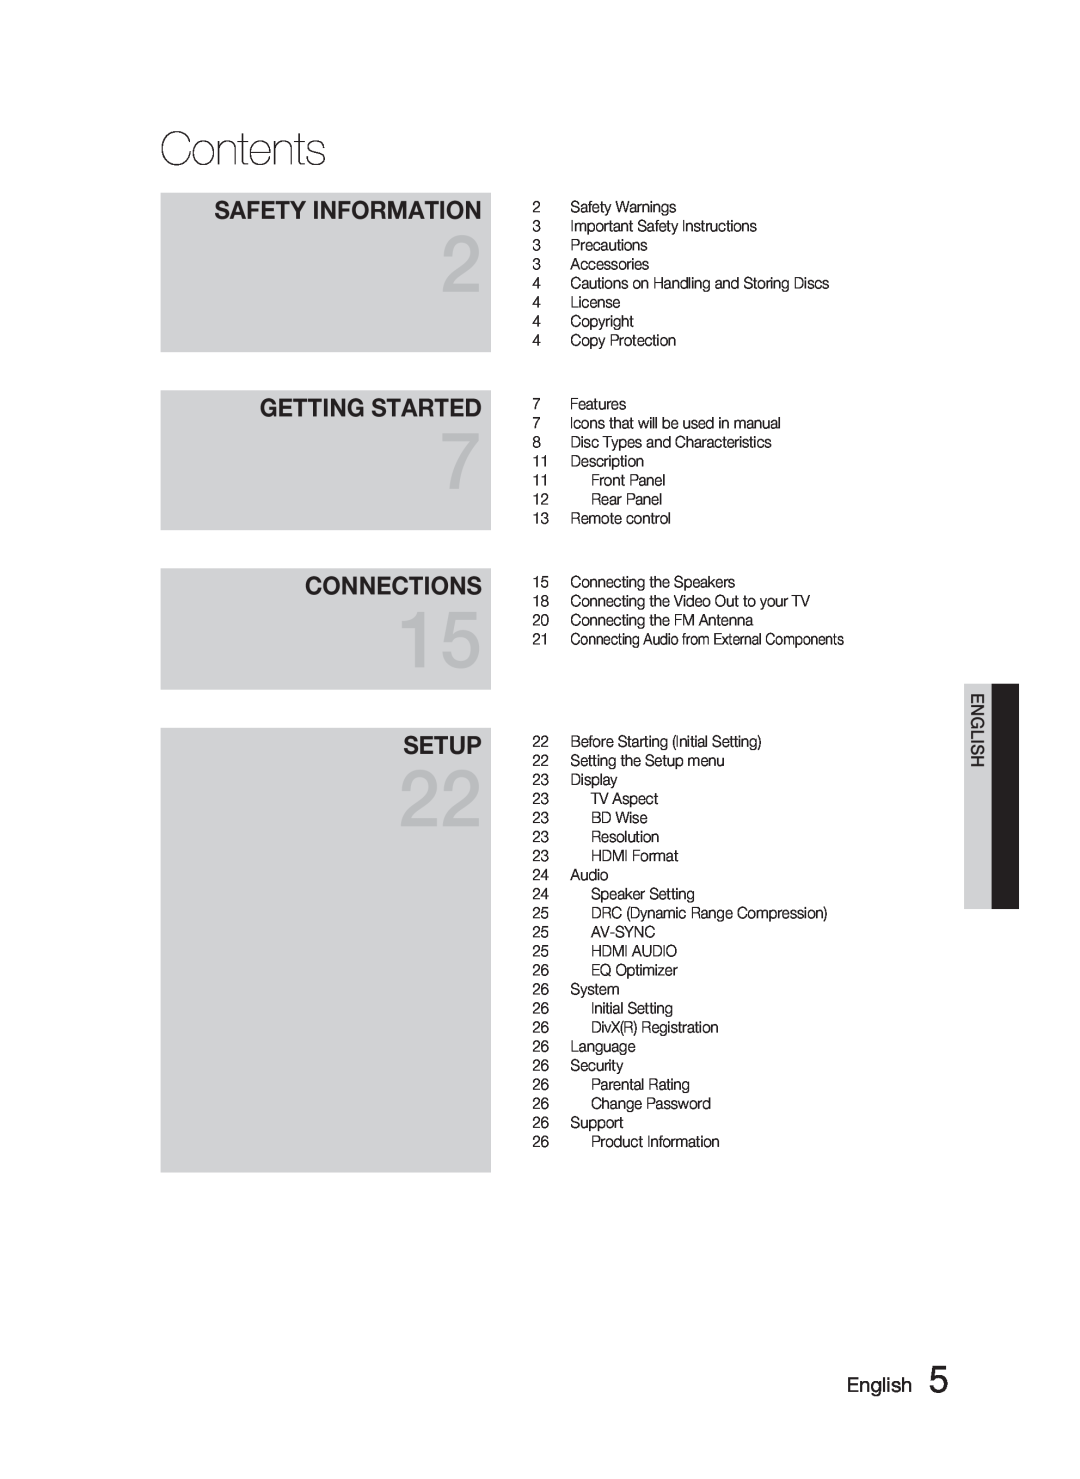 Samsung HT-C463-XAC, AH68-02259Q user manual Contents, Getting Started, Connections, Setup, Safety Information, English 